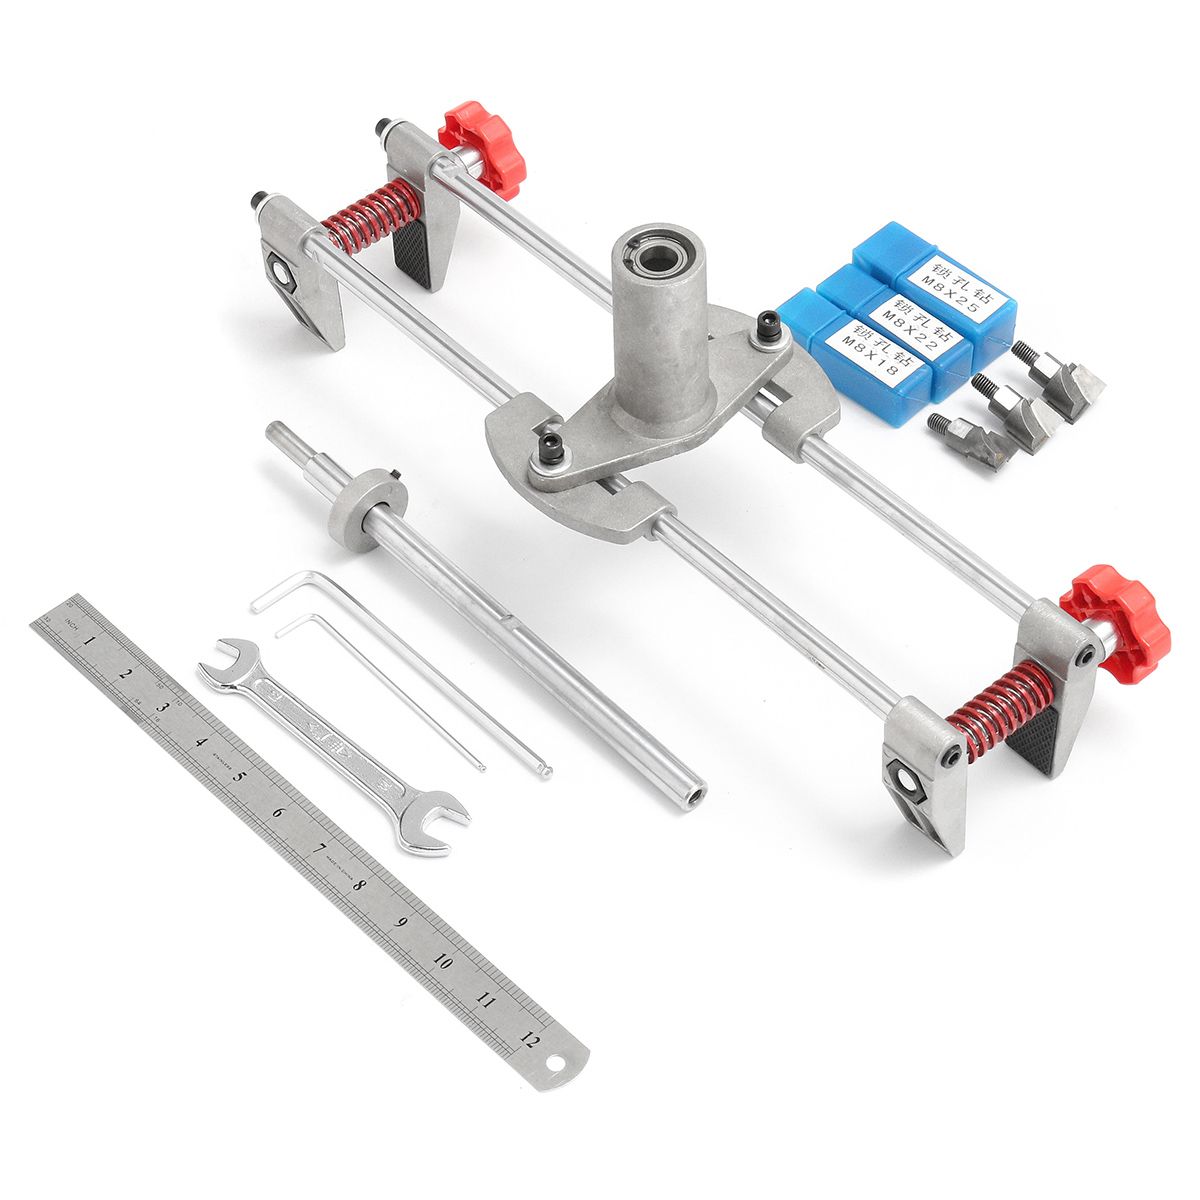 5-Minutes-Door-Lock-Mortiser-Jig-Kit-With-Three-Cutters-1201940